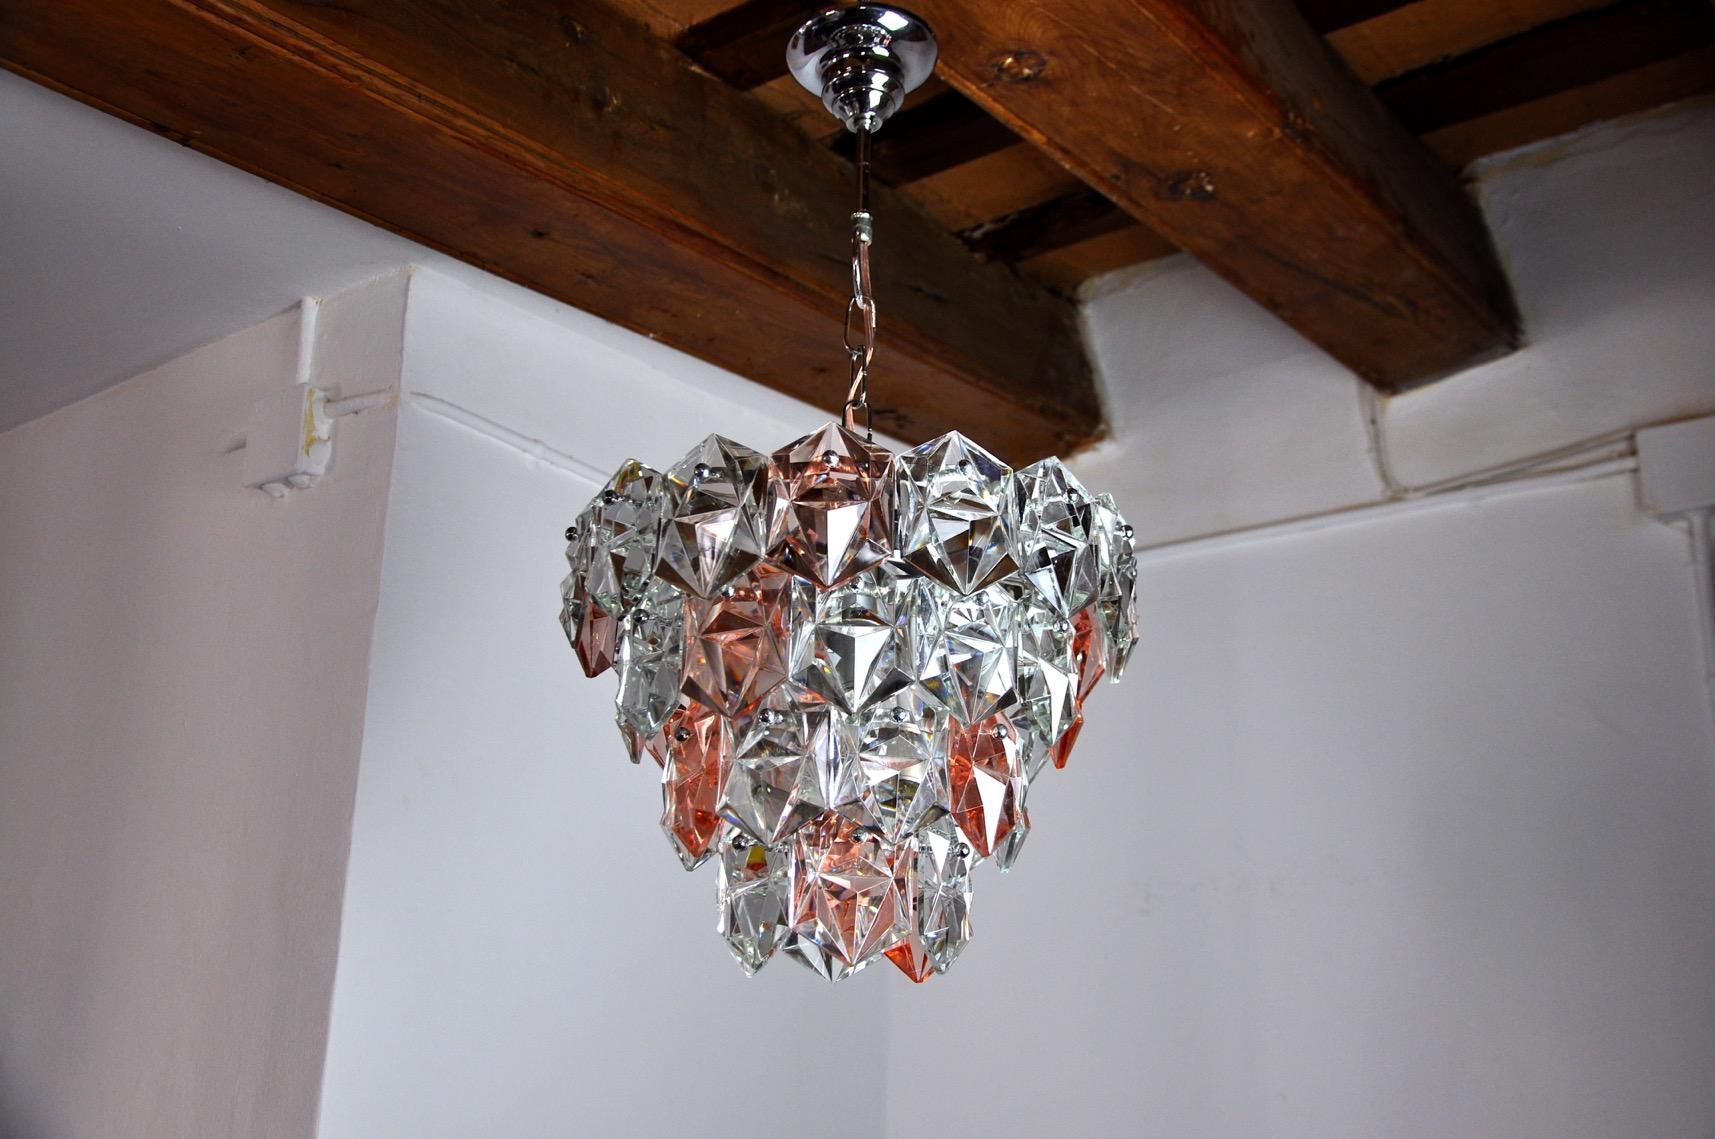 Rare two-tone Kinkeldey chandelier designed and produced in Germany in the 1970s. Golden brass structure composed of pink and transparent cut crystals in perfect condition spread over 4 floors. Rare design object that will illuminate your interior